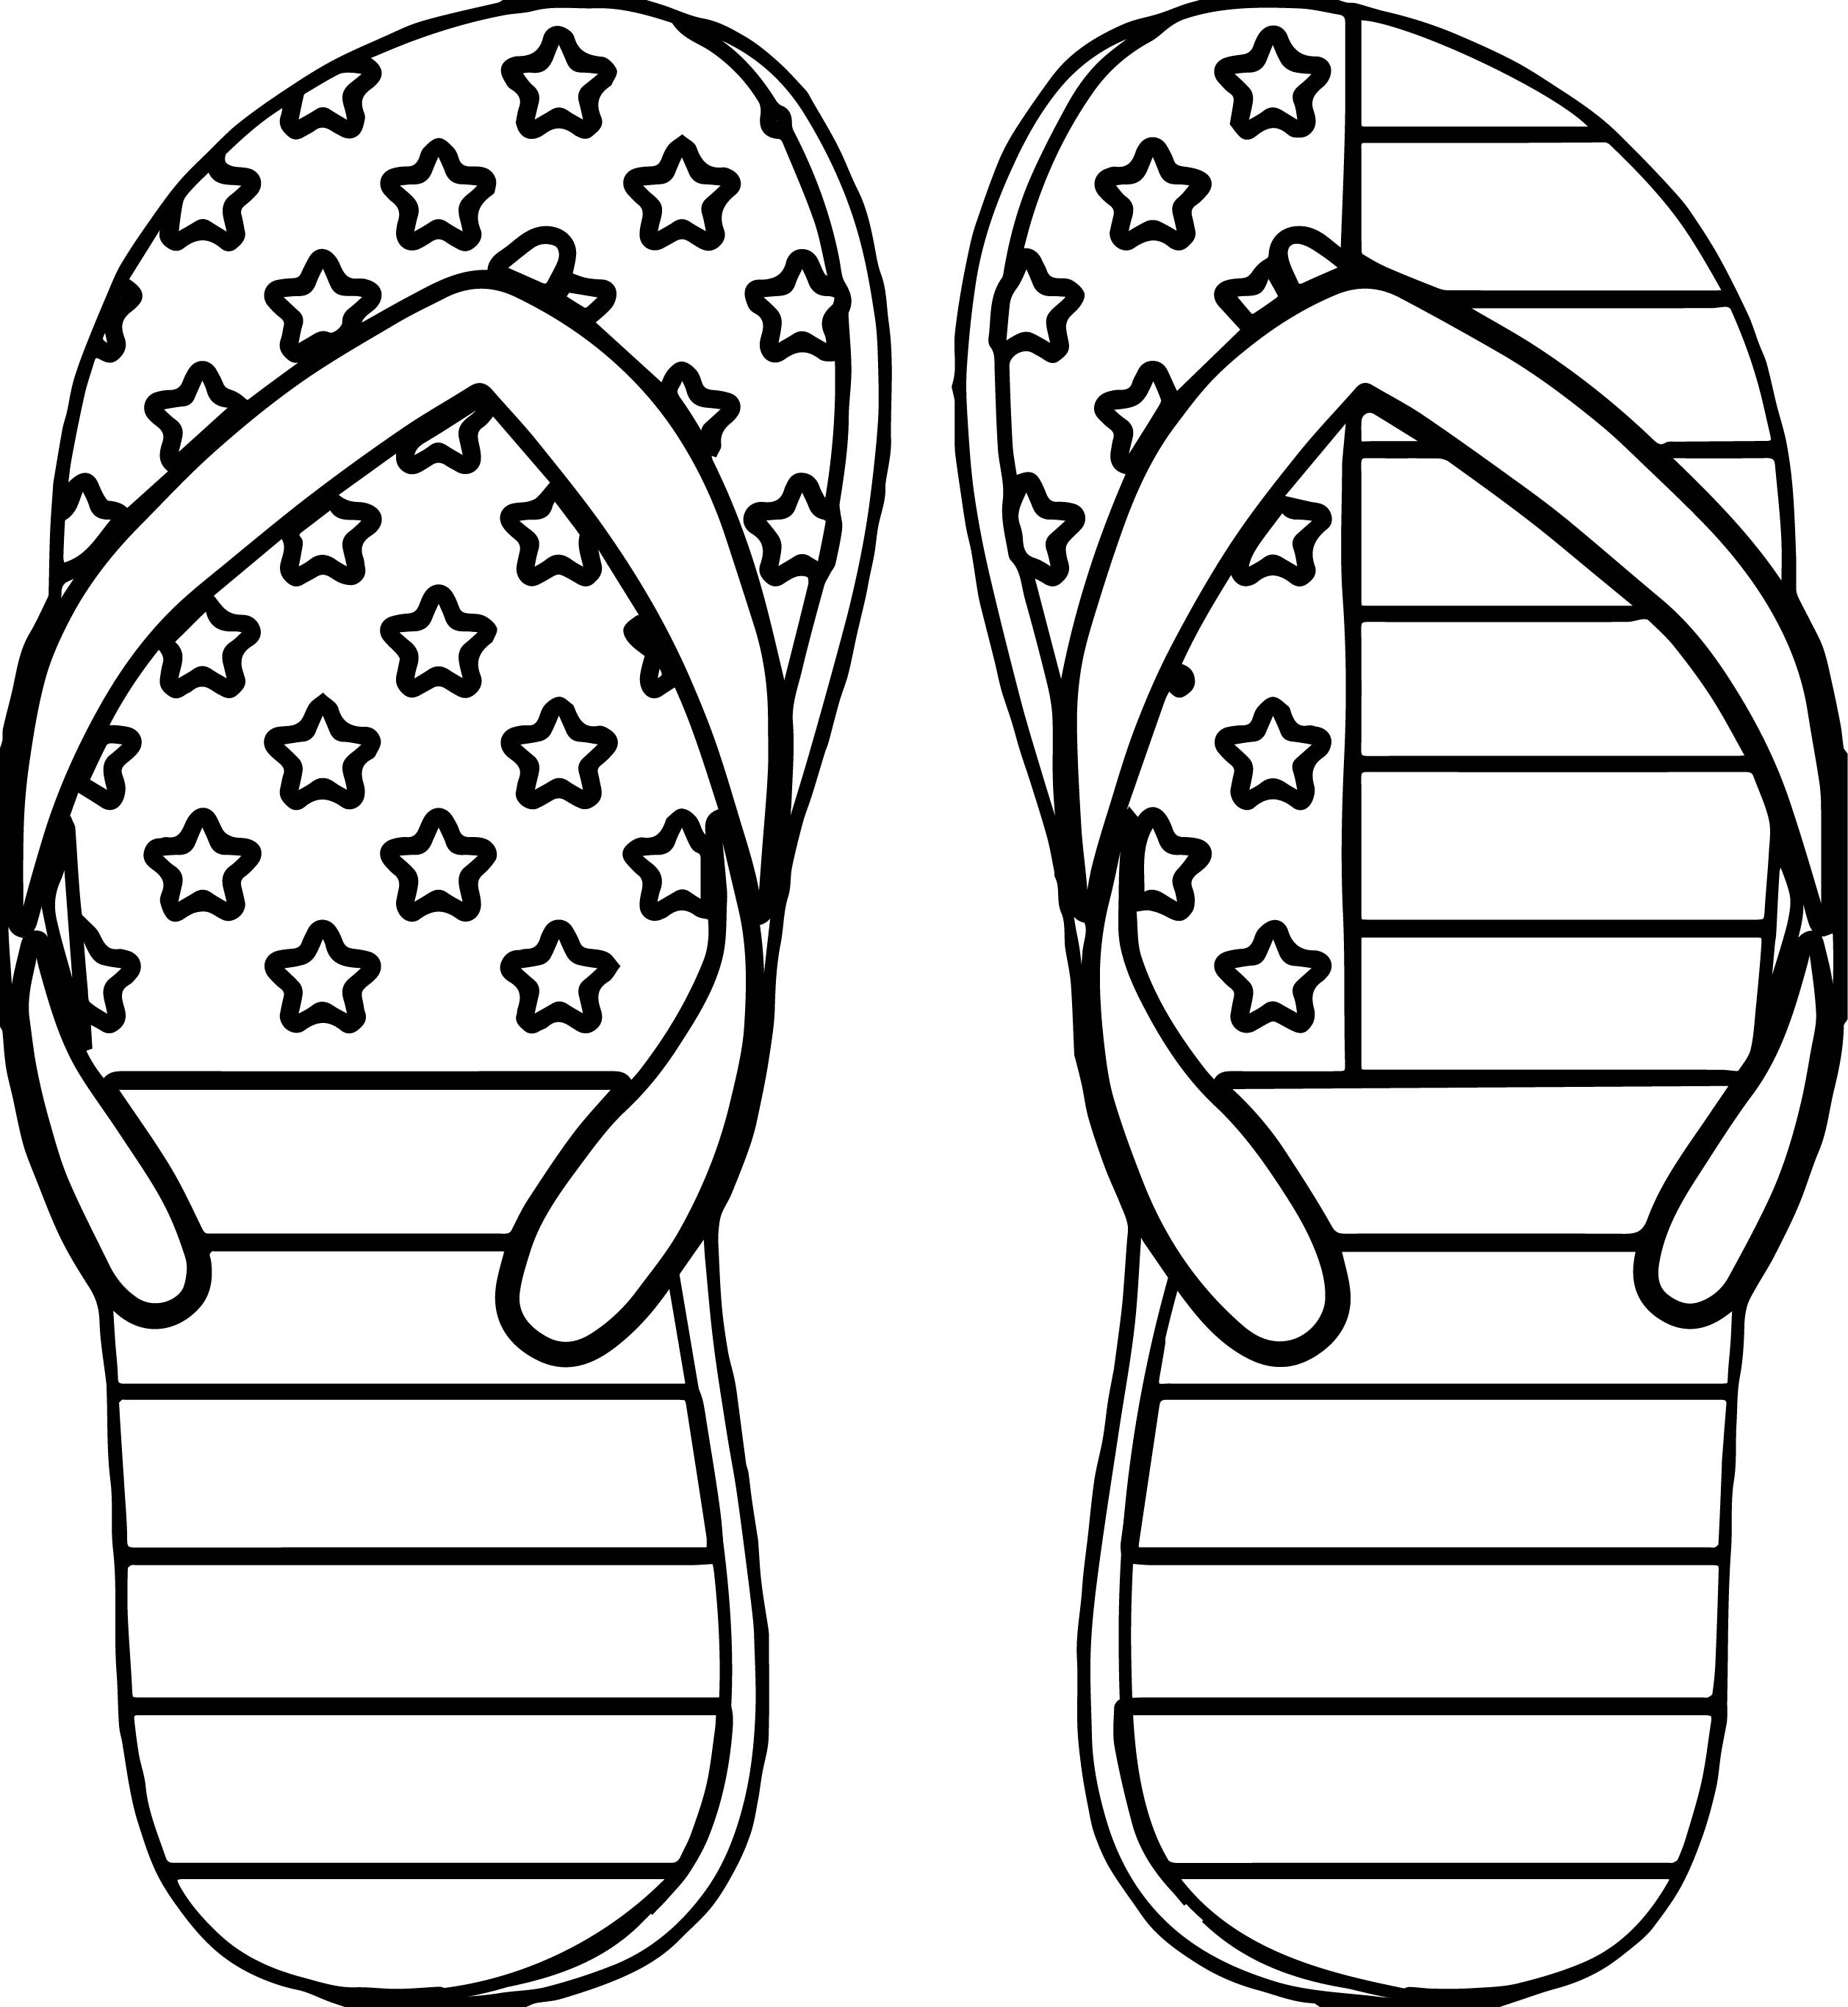 July 4Th Coloring Pages
 4th July Slipper Coloring Page